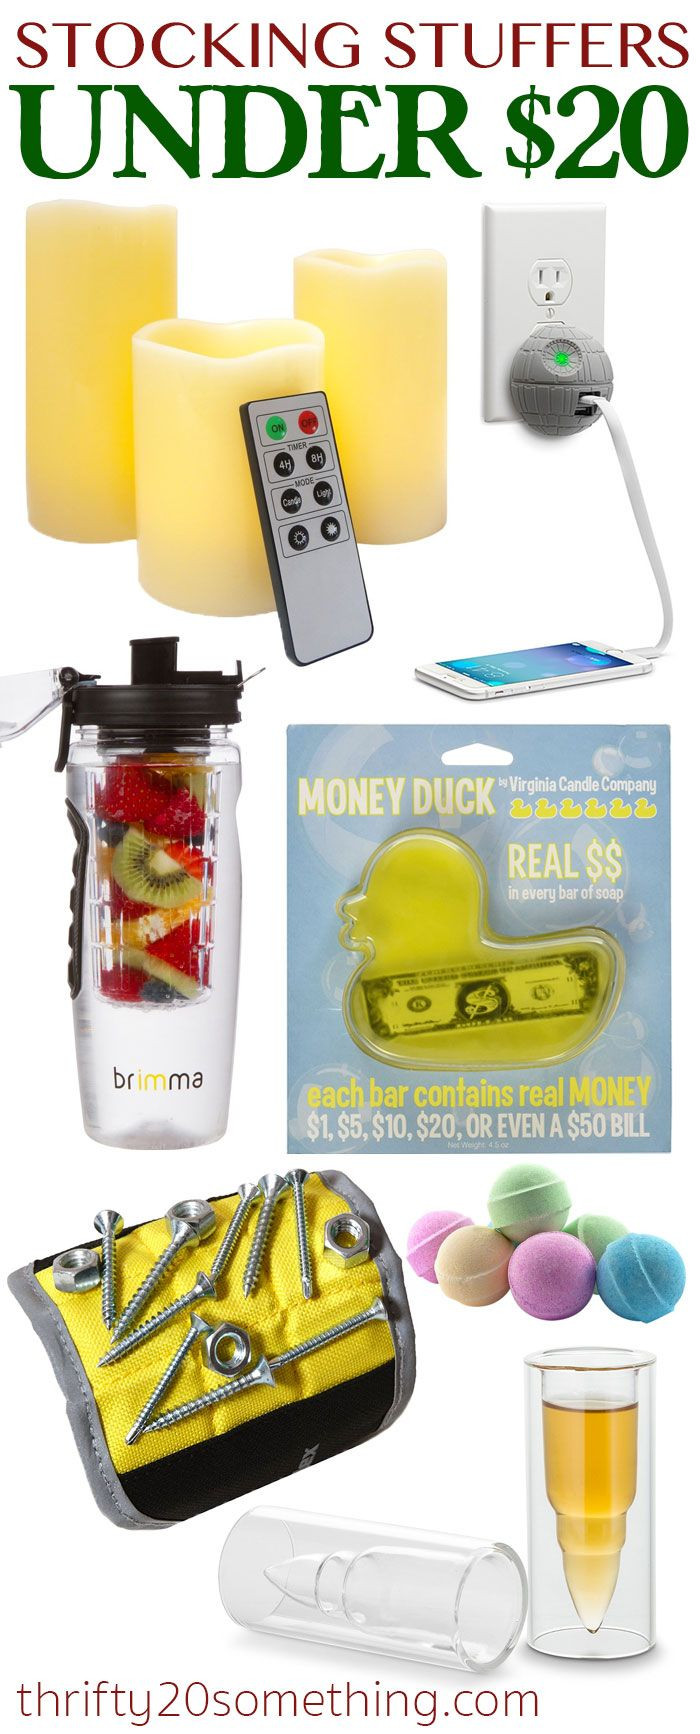 Office Holiday Gift Ideas Under 20
 10 Stocking Stuffers & Gifts Under $20